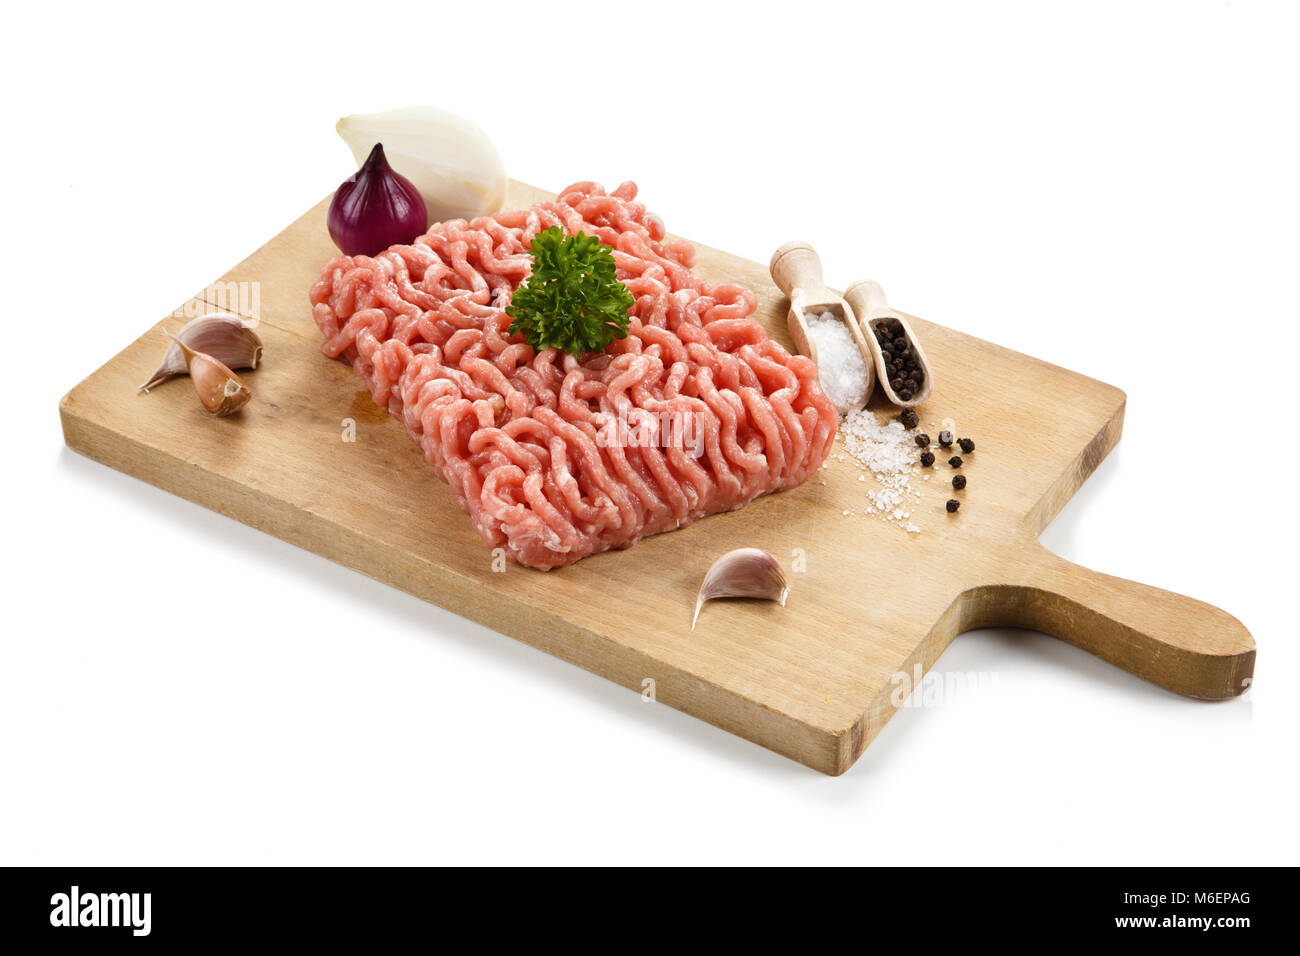 Raw minced pork on cutting board and vegetables Stock Photo